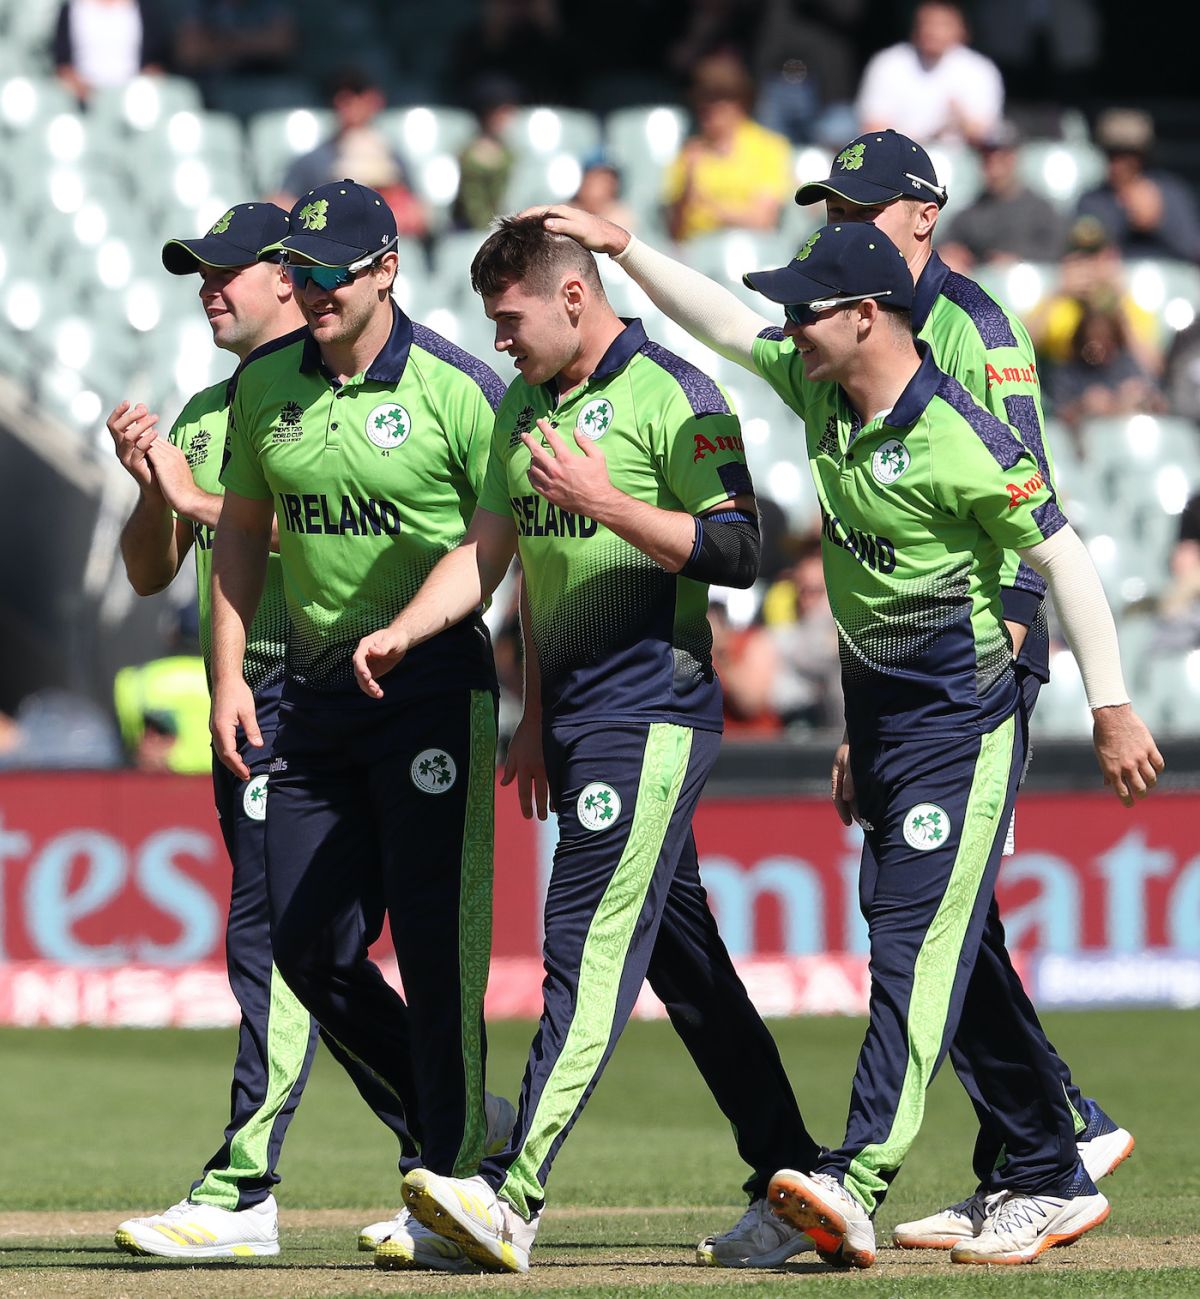 Hat-trick taker Josh Little is congratulated by his team-mates, Ireland vs New Zealand, ICC Men's T20 World Cup 2022, Adelaide, November 4, 2022
